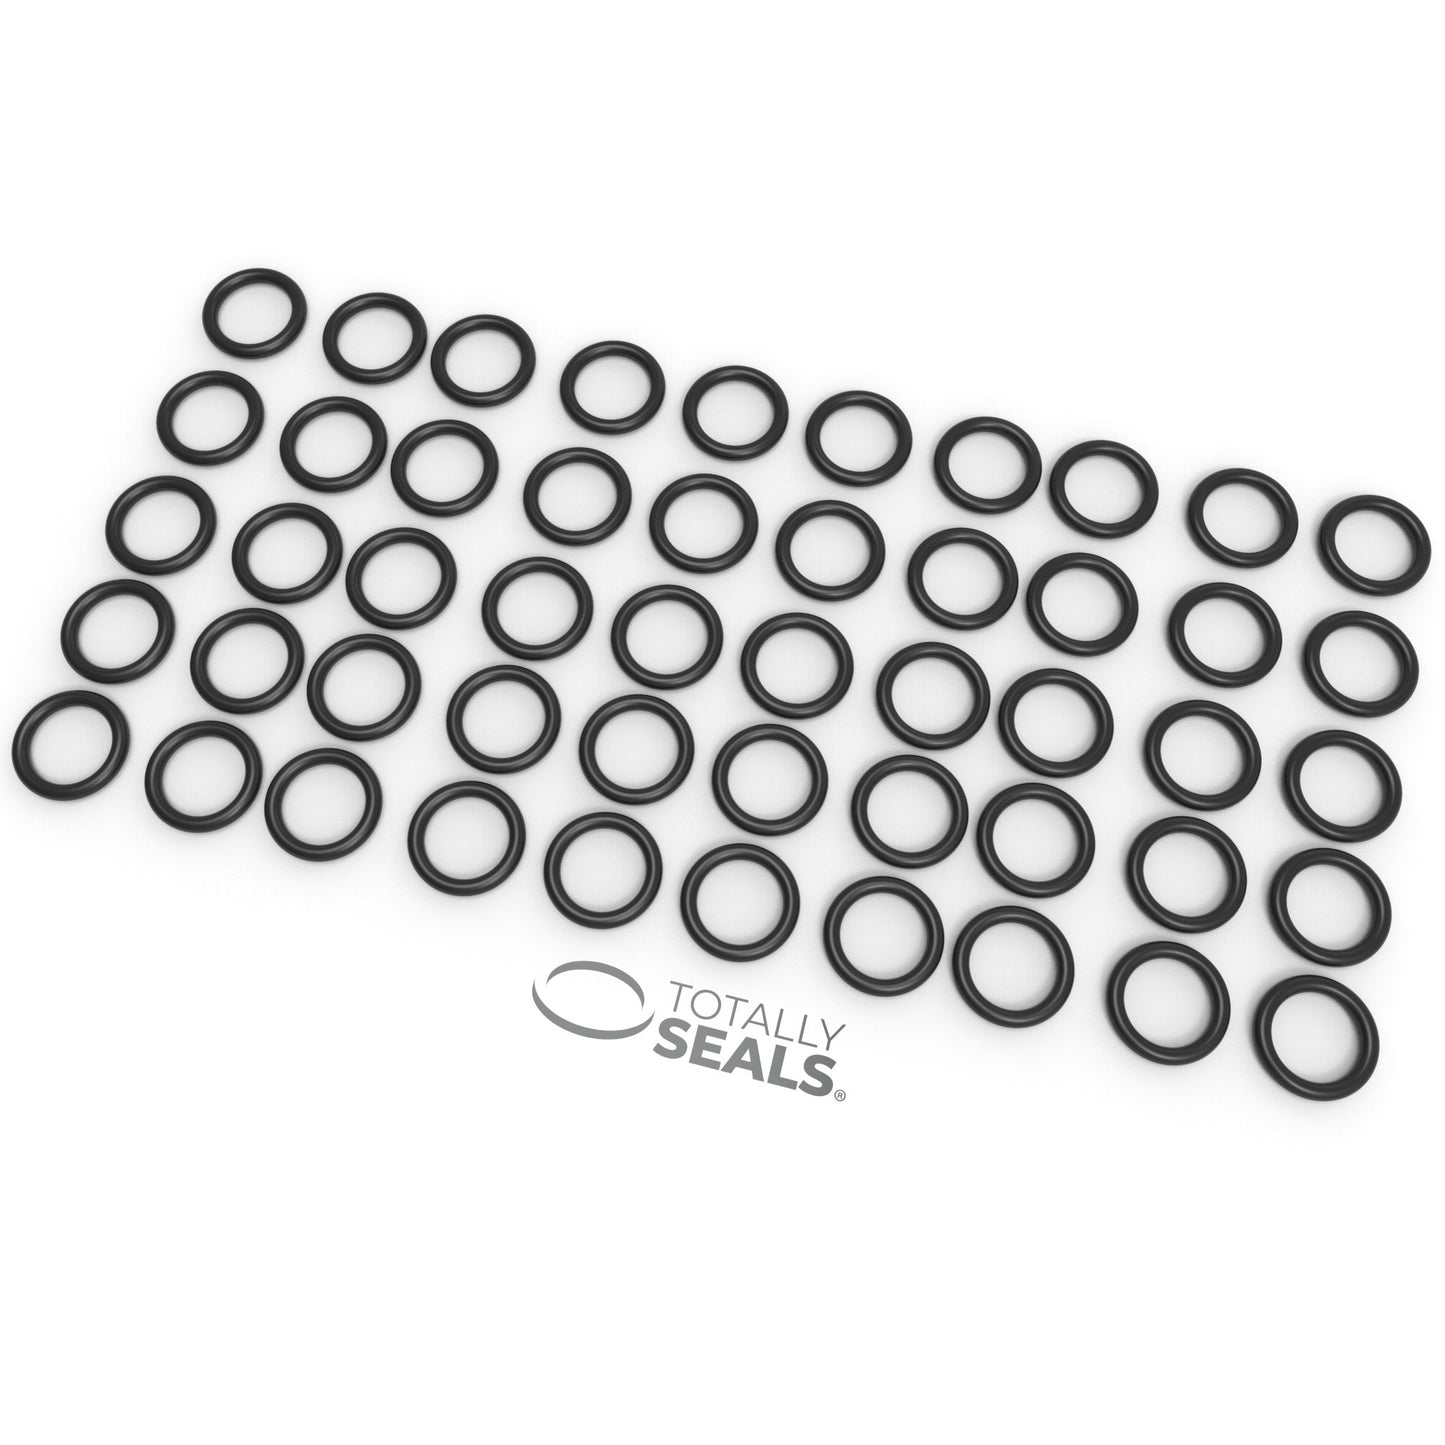 27mm x 2.5mm (32mm OD) Nitrile O-Rings - Totally Seals®